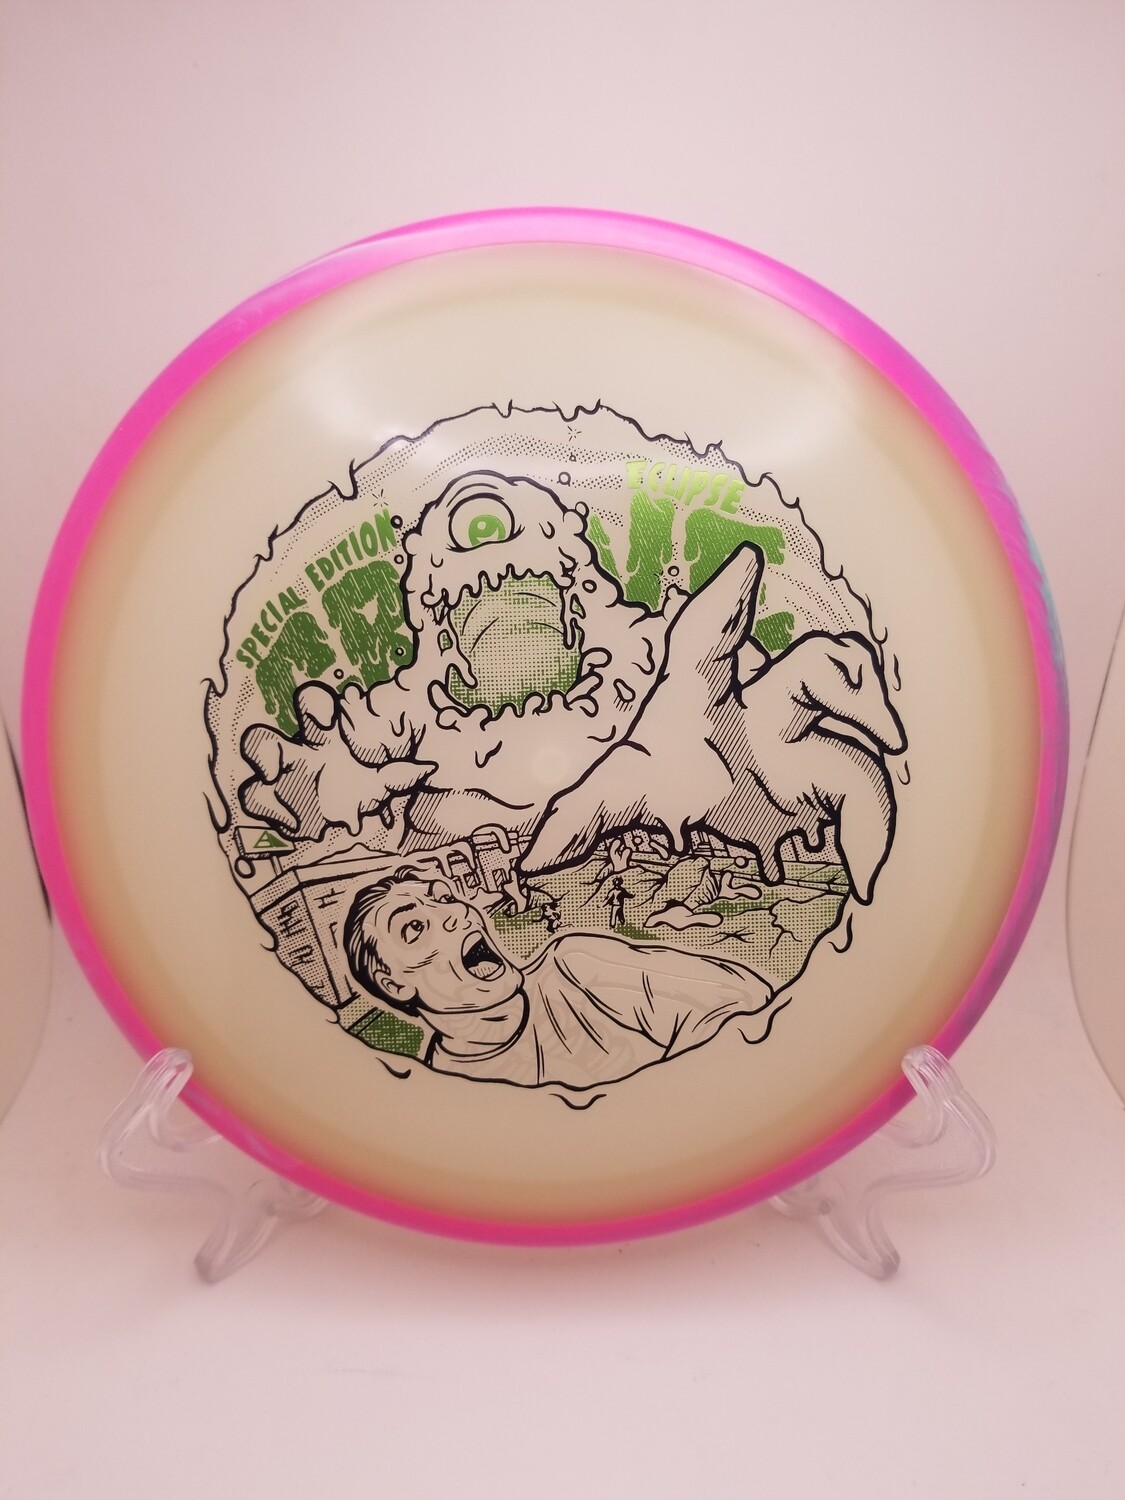 Axiom Discs Special Edition Eclipse Crave Pink Swirly Rim 173g